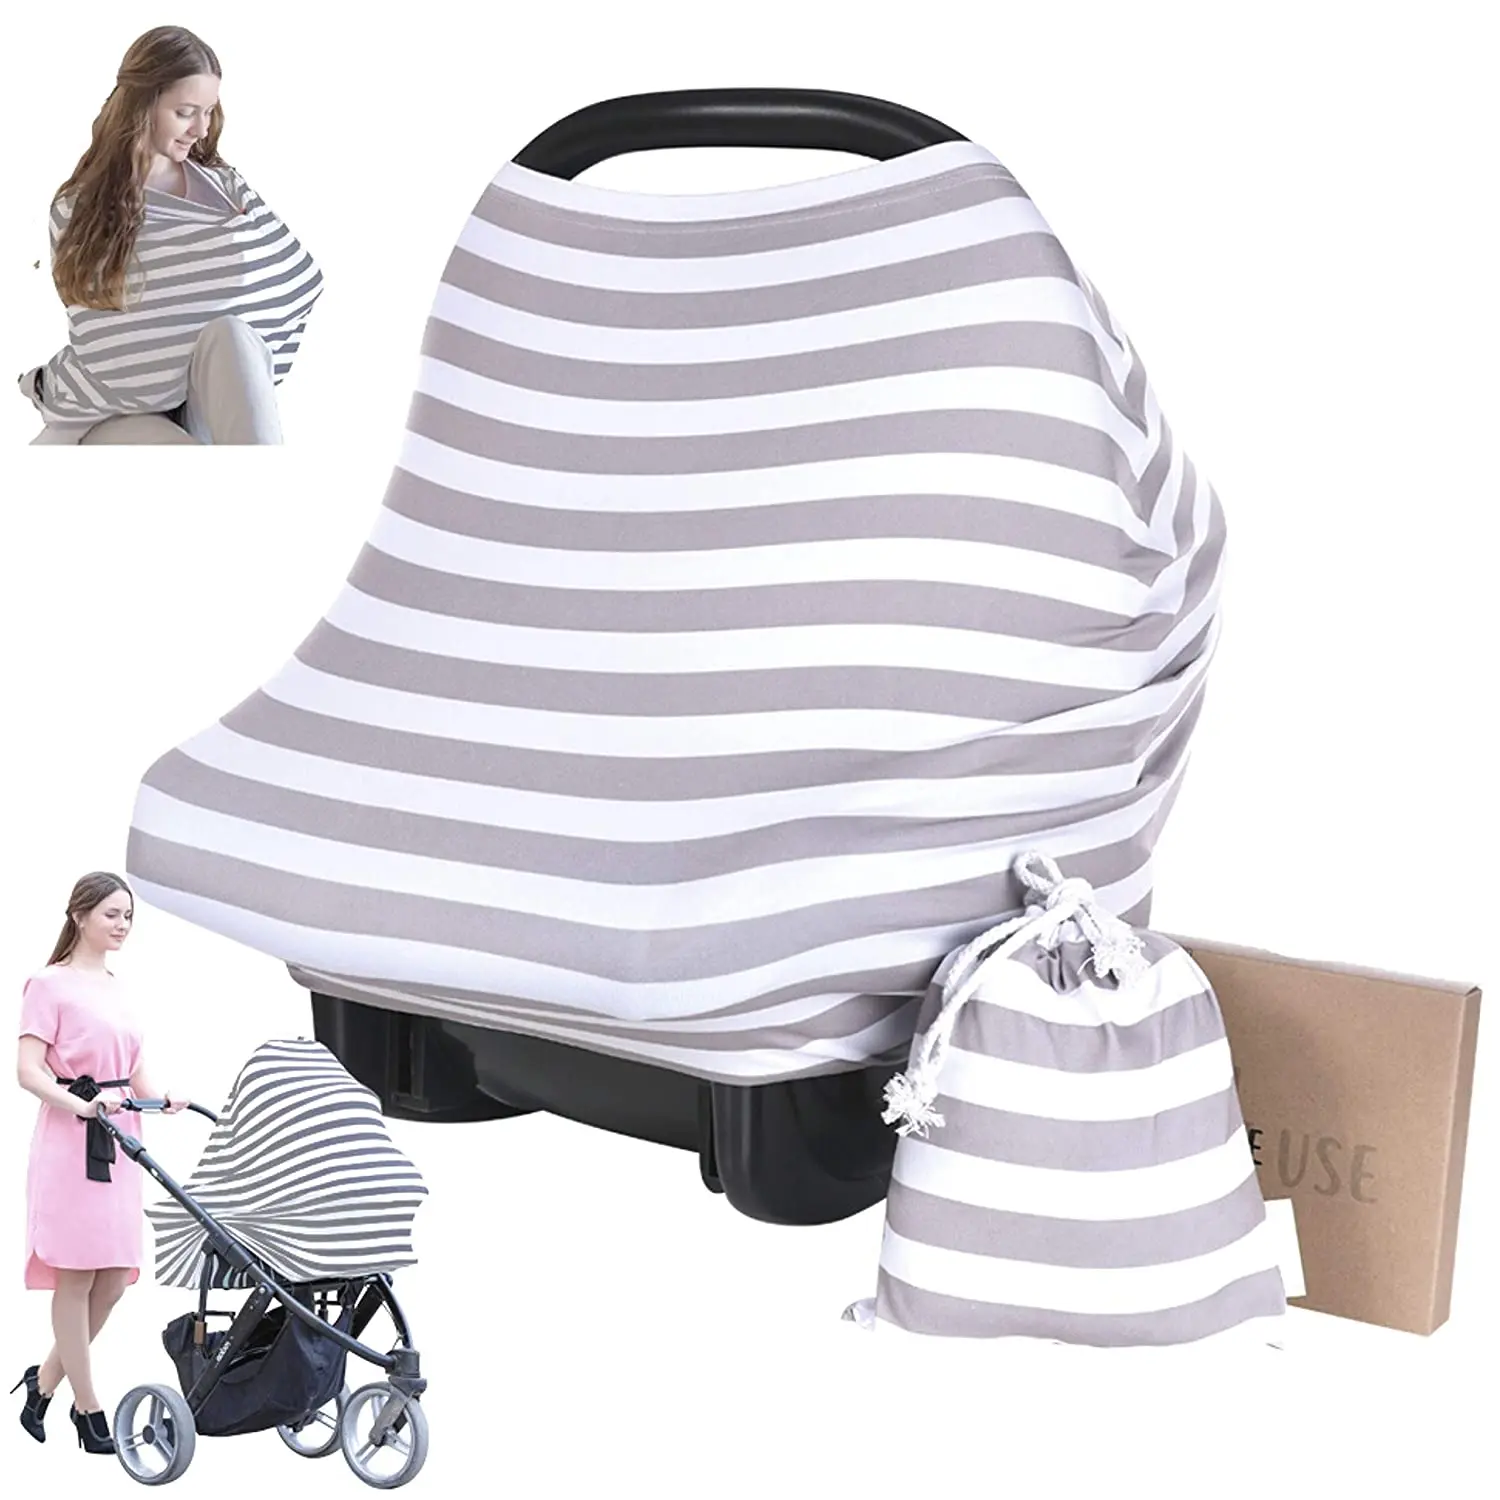 

Newborn Car Seat Nursing Breastfeeding Cover Stretchy Baby Stroller Carriers Carseat Canopy